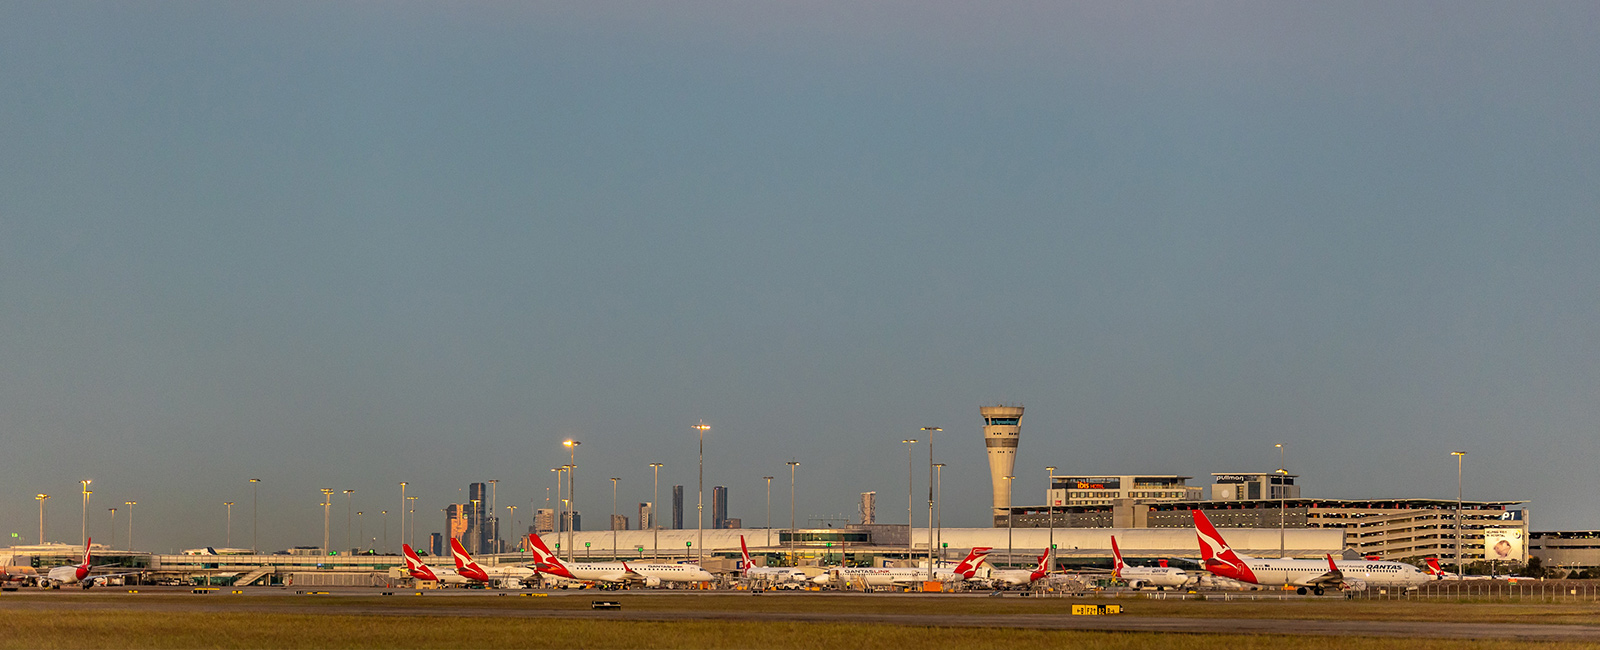 Brisbane Airport from airfield